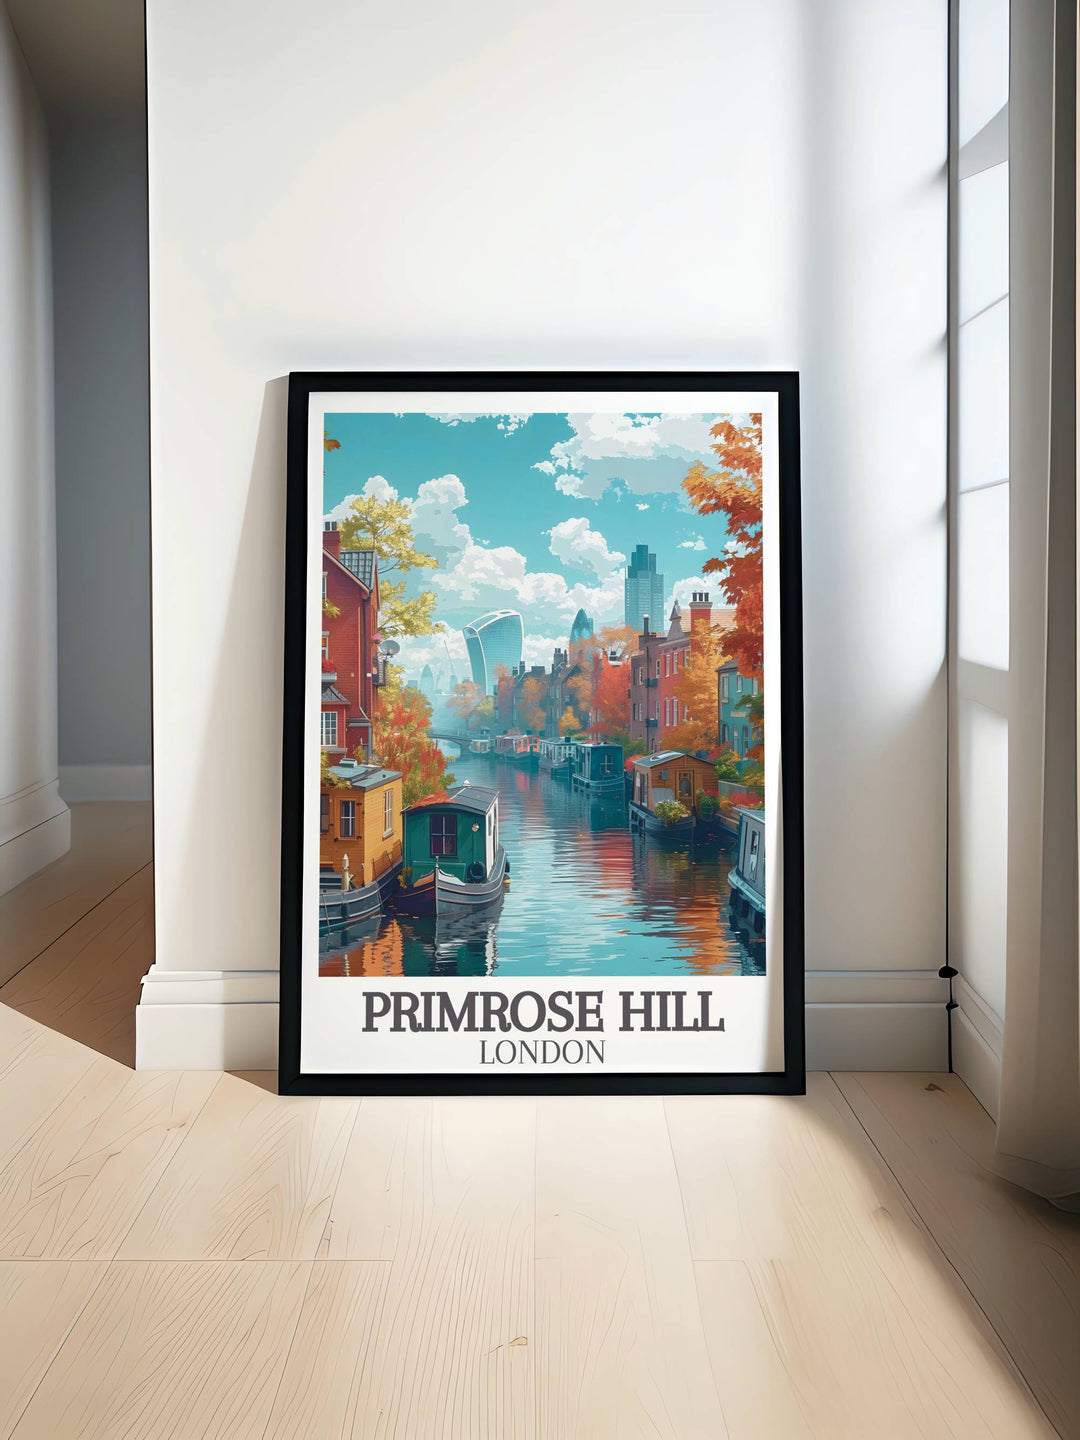 Primrose Hill Modern Wall Decor capturing the serene beauty of Londons skyline, perfect for adding a touch of tranquility to your home decor.